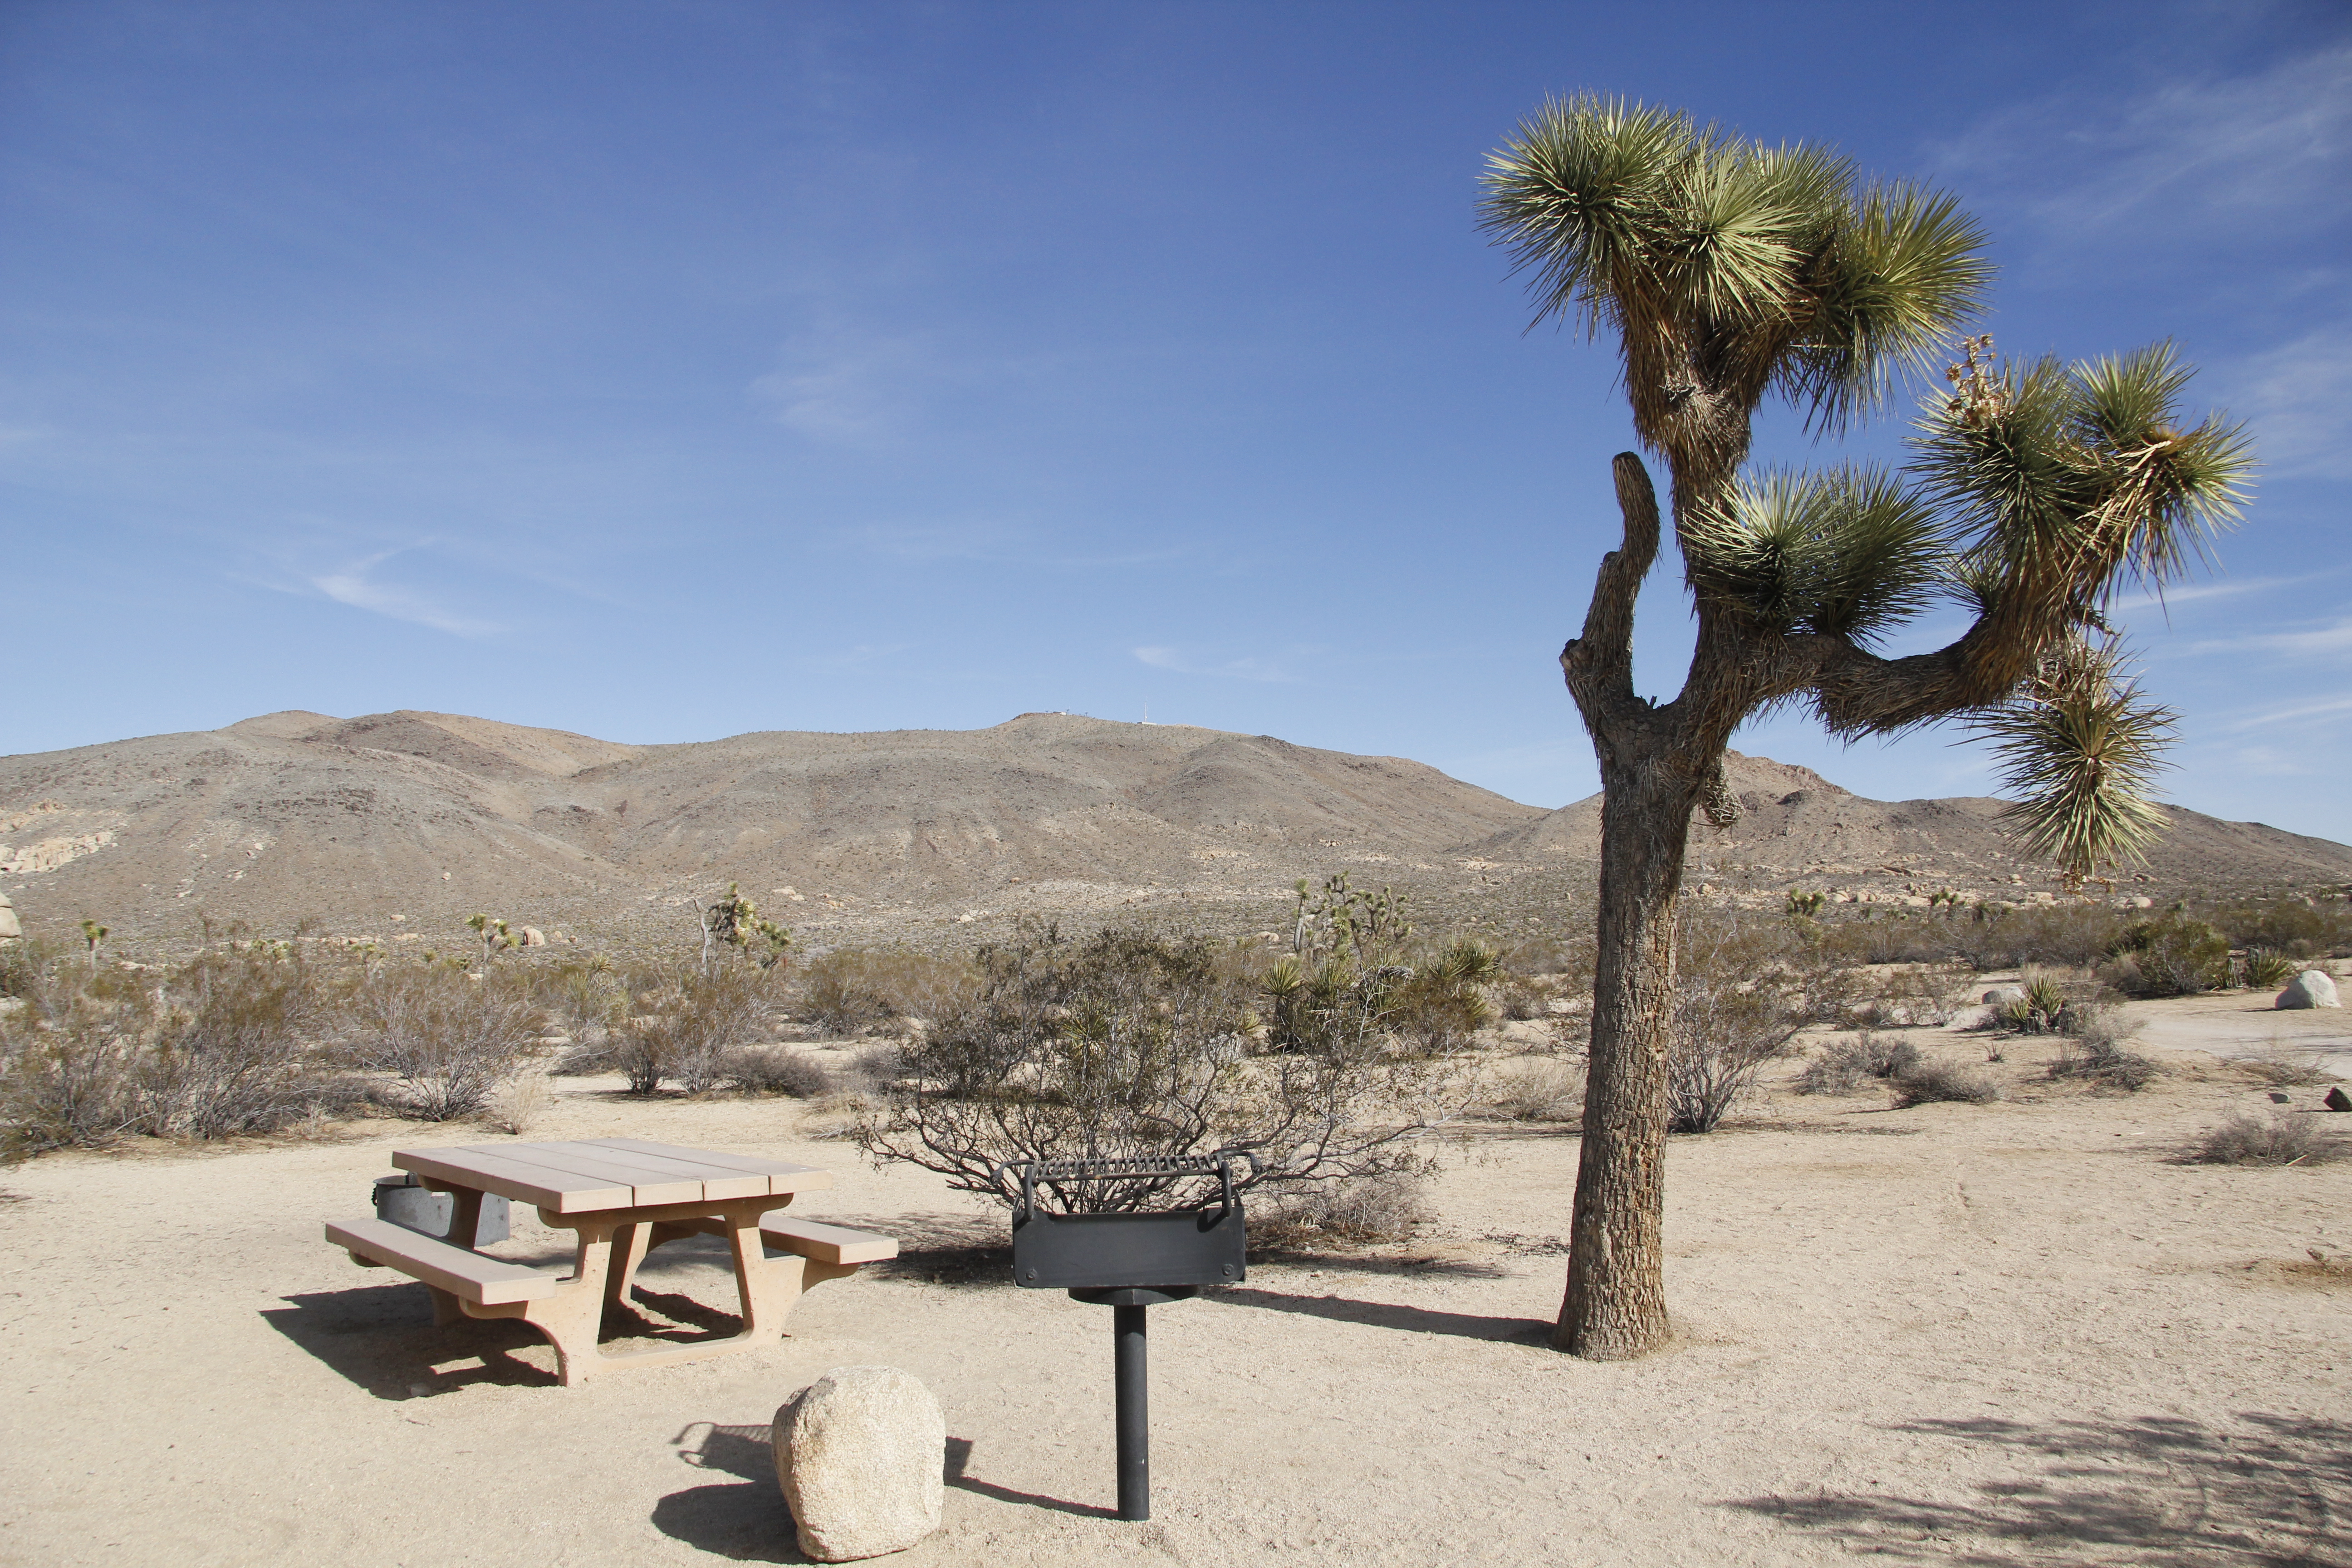 A campground with a picnic table, a grill and a Joshua tree.